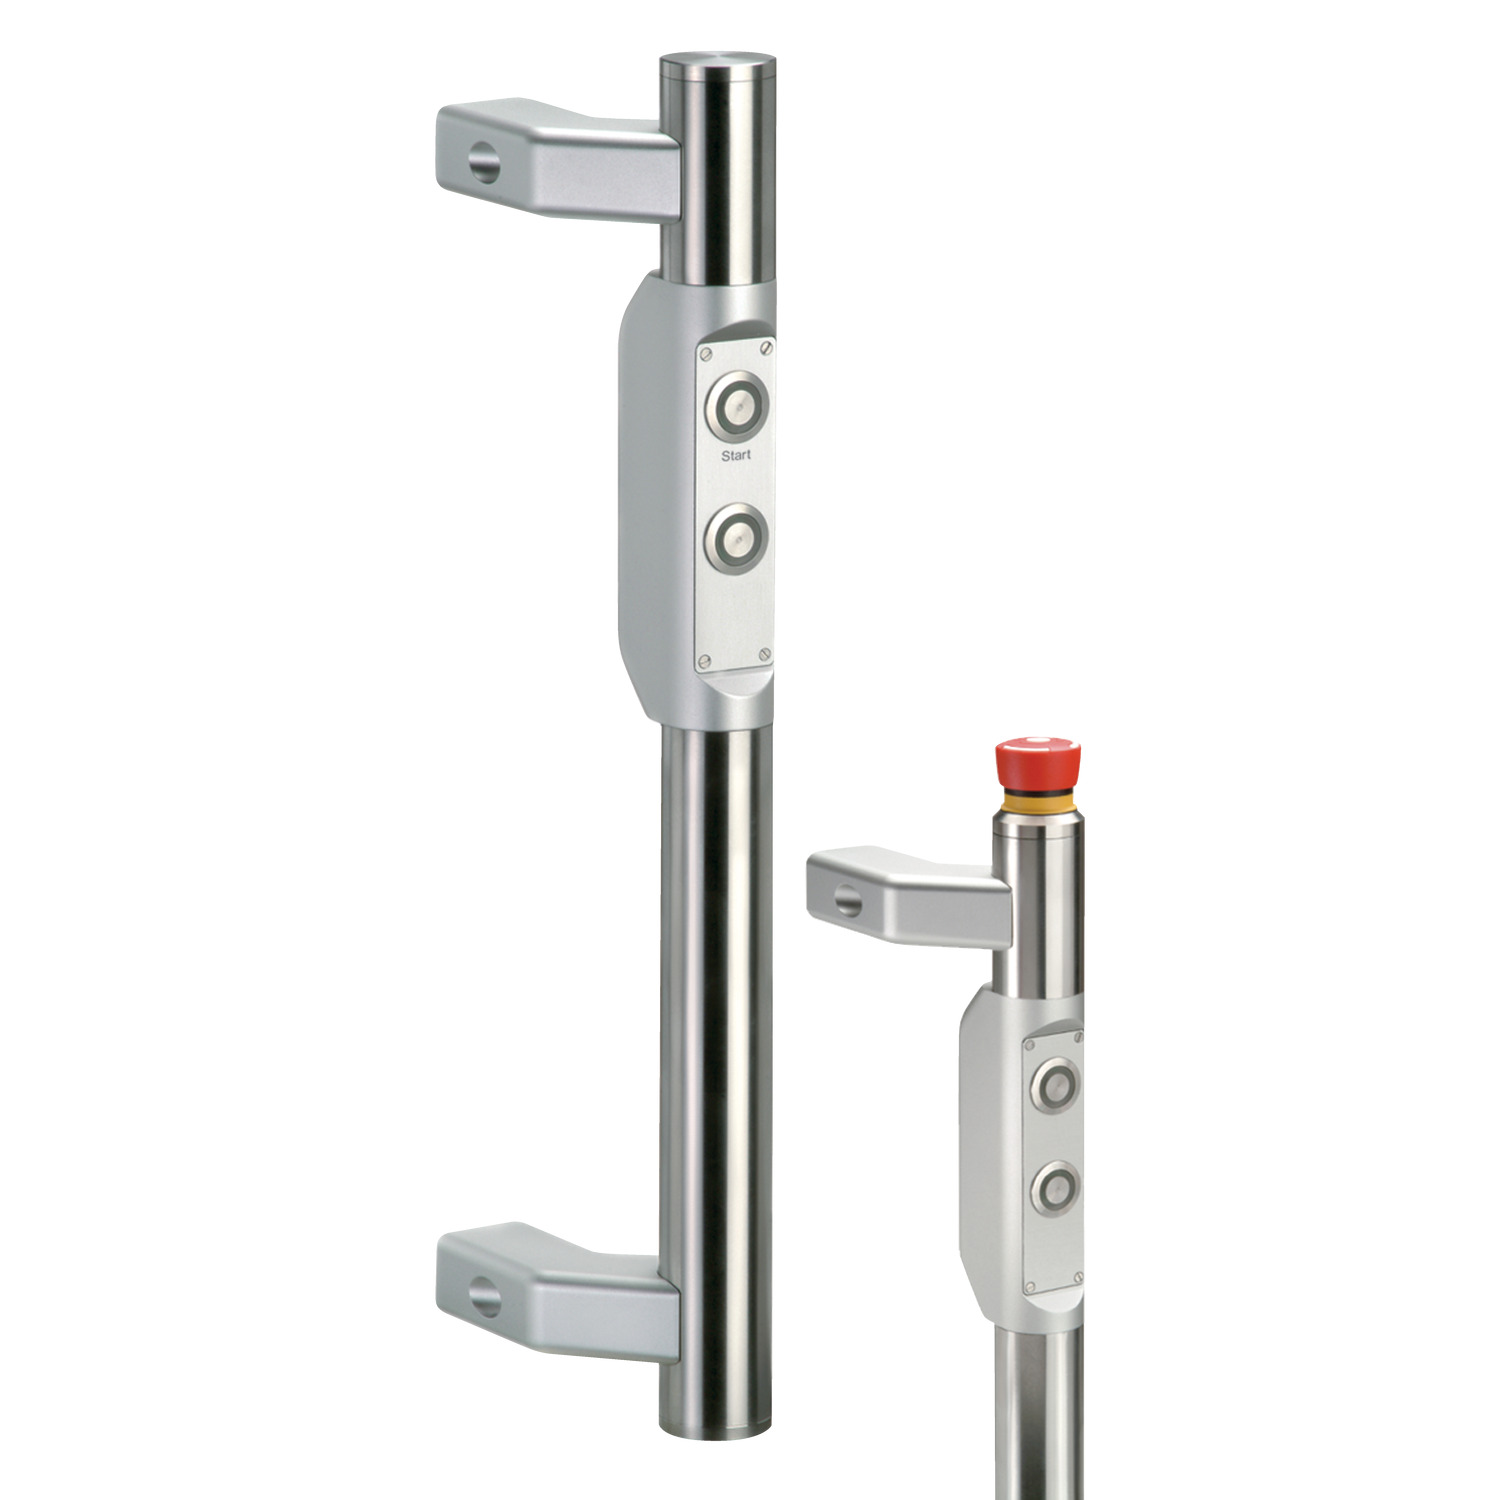 B8120.AC0105 Functional Handle - Electronic Type Three - Right. 2 Push Buttons, 1 Emergency Stop Button - 12-pole (M12 x 1)